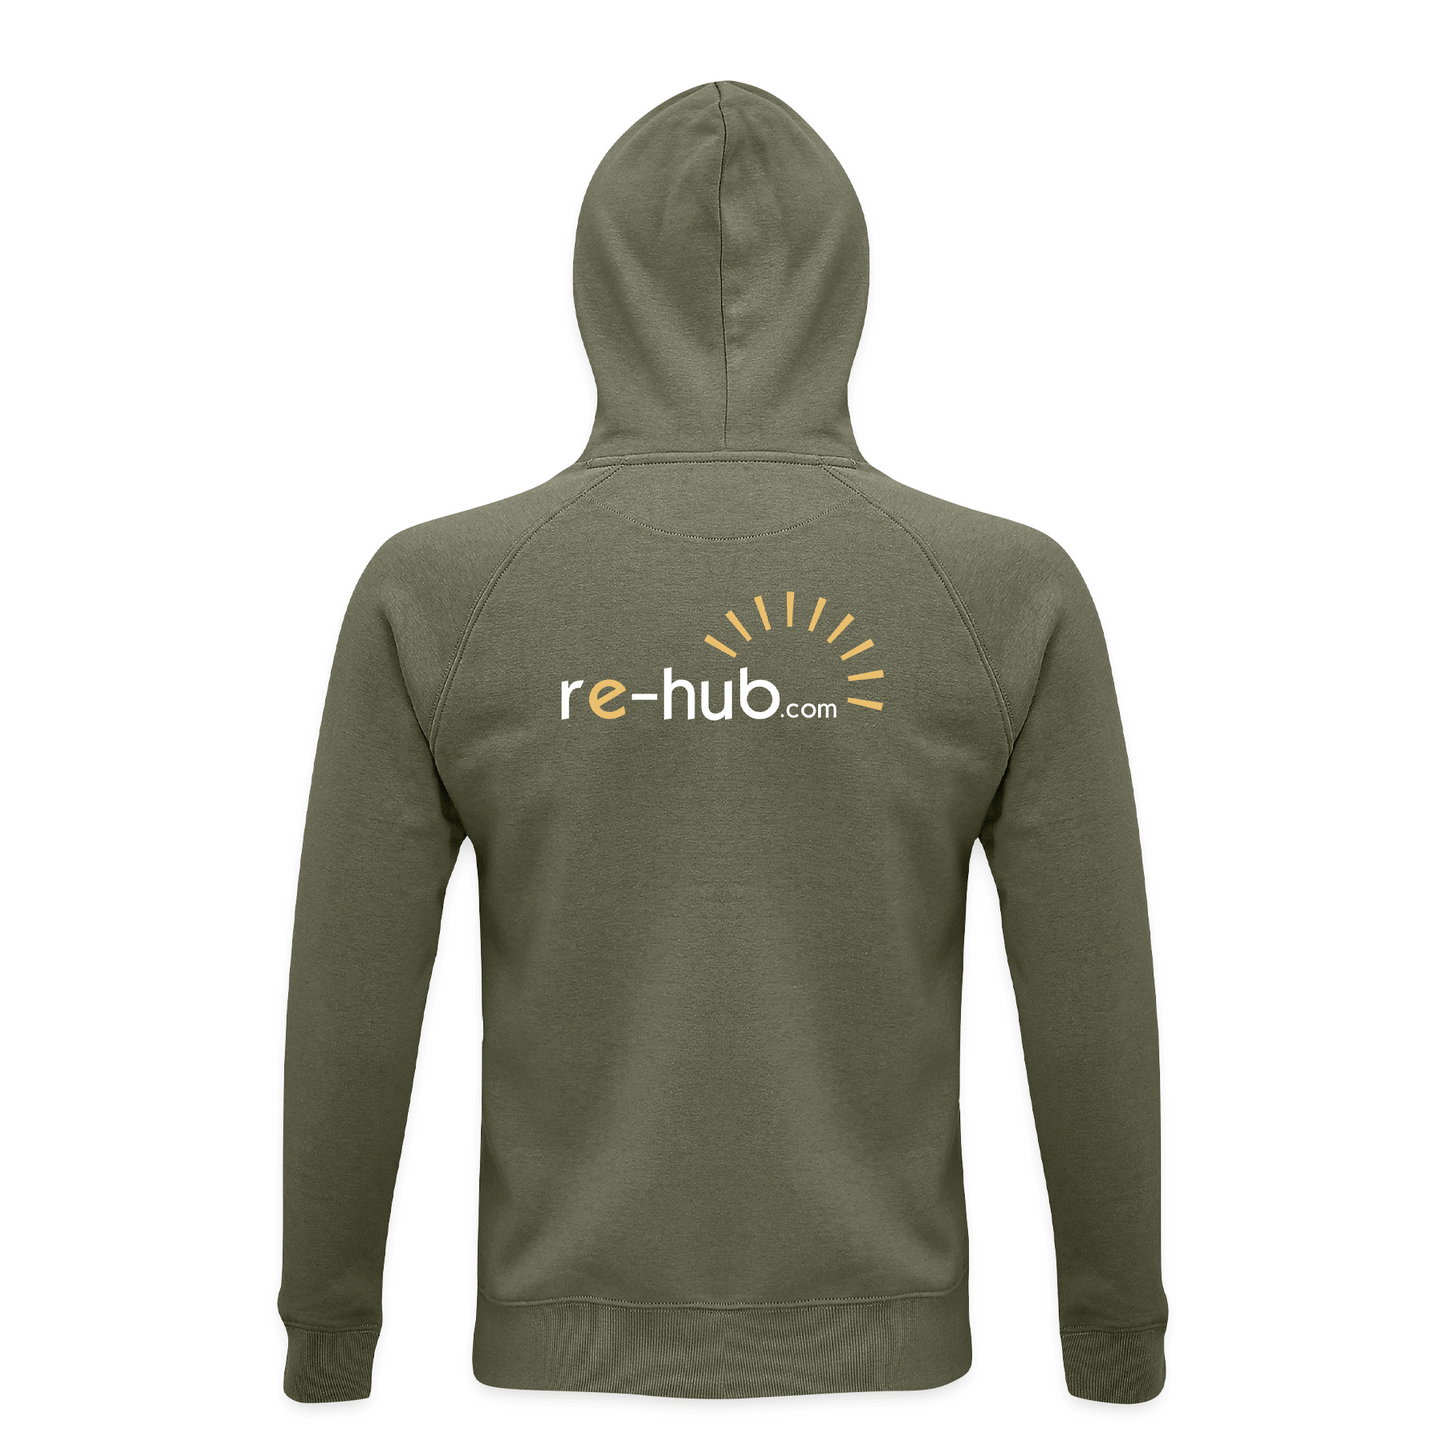 MEN'S YOUR PLANET HOODIE organic cotton and polyester.